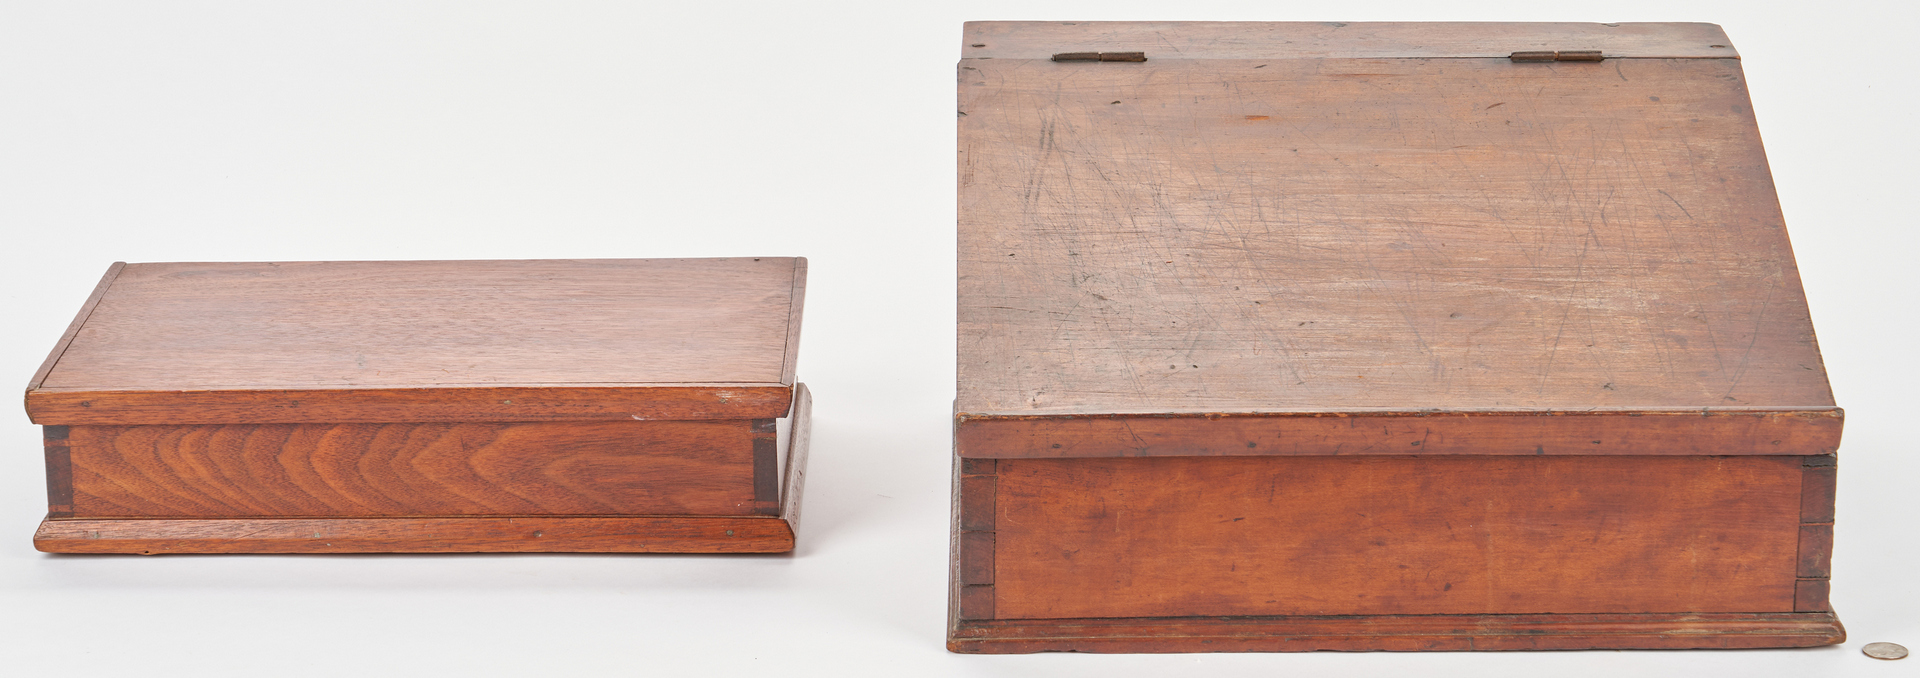 Lot 369: Southern Dovetailed Tabletop Desk & Sewing Box, Poss. TN